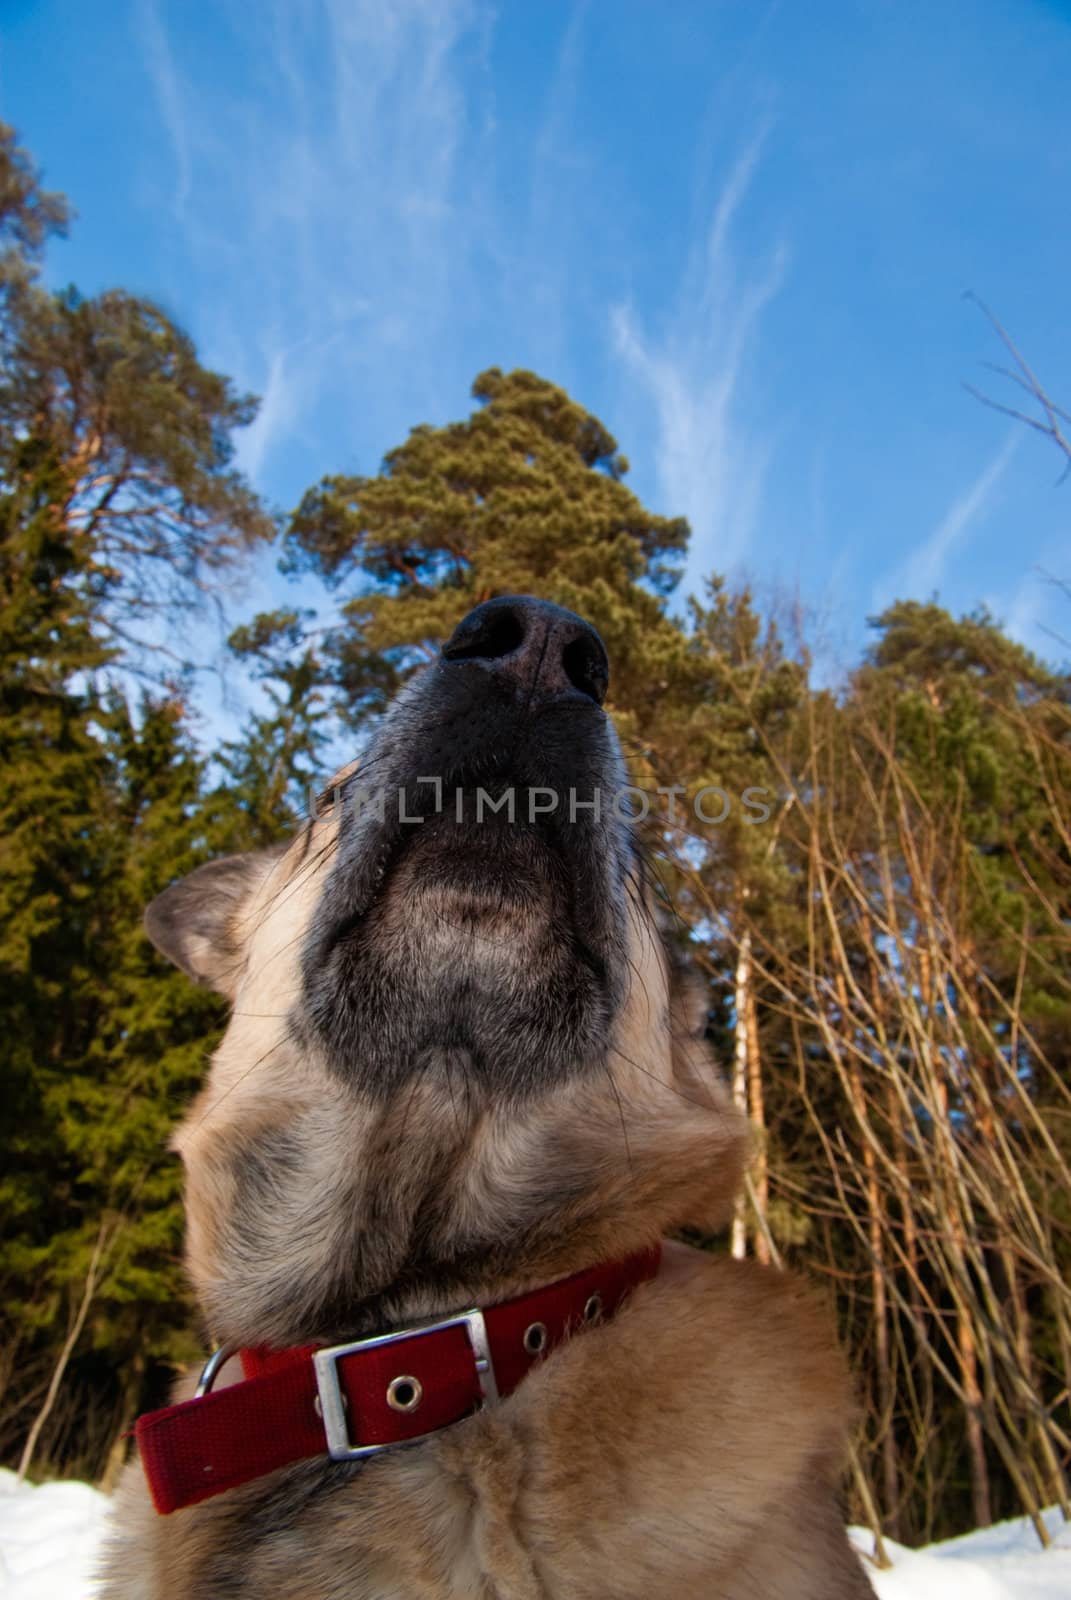 Dog looking at the sky with clouds